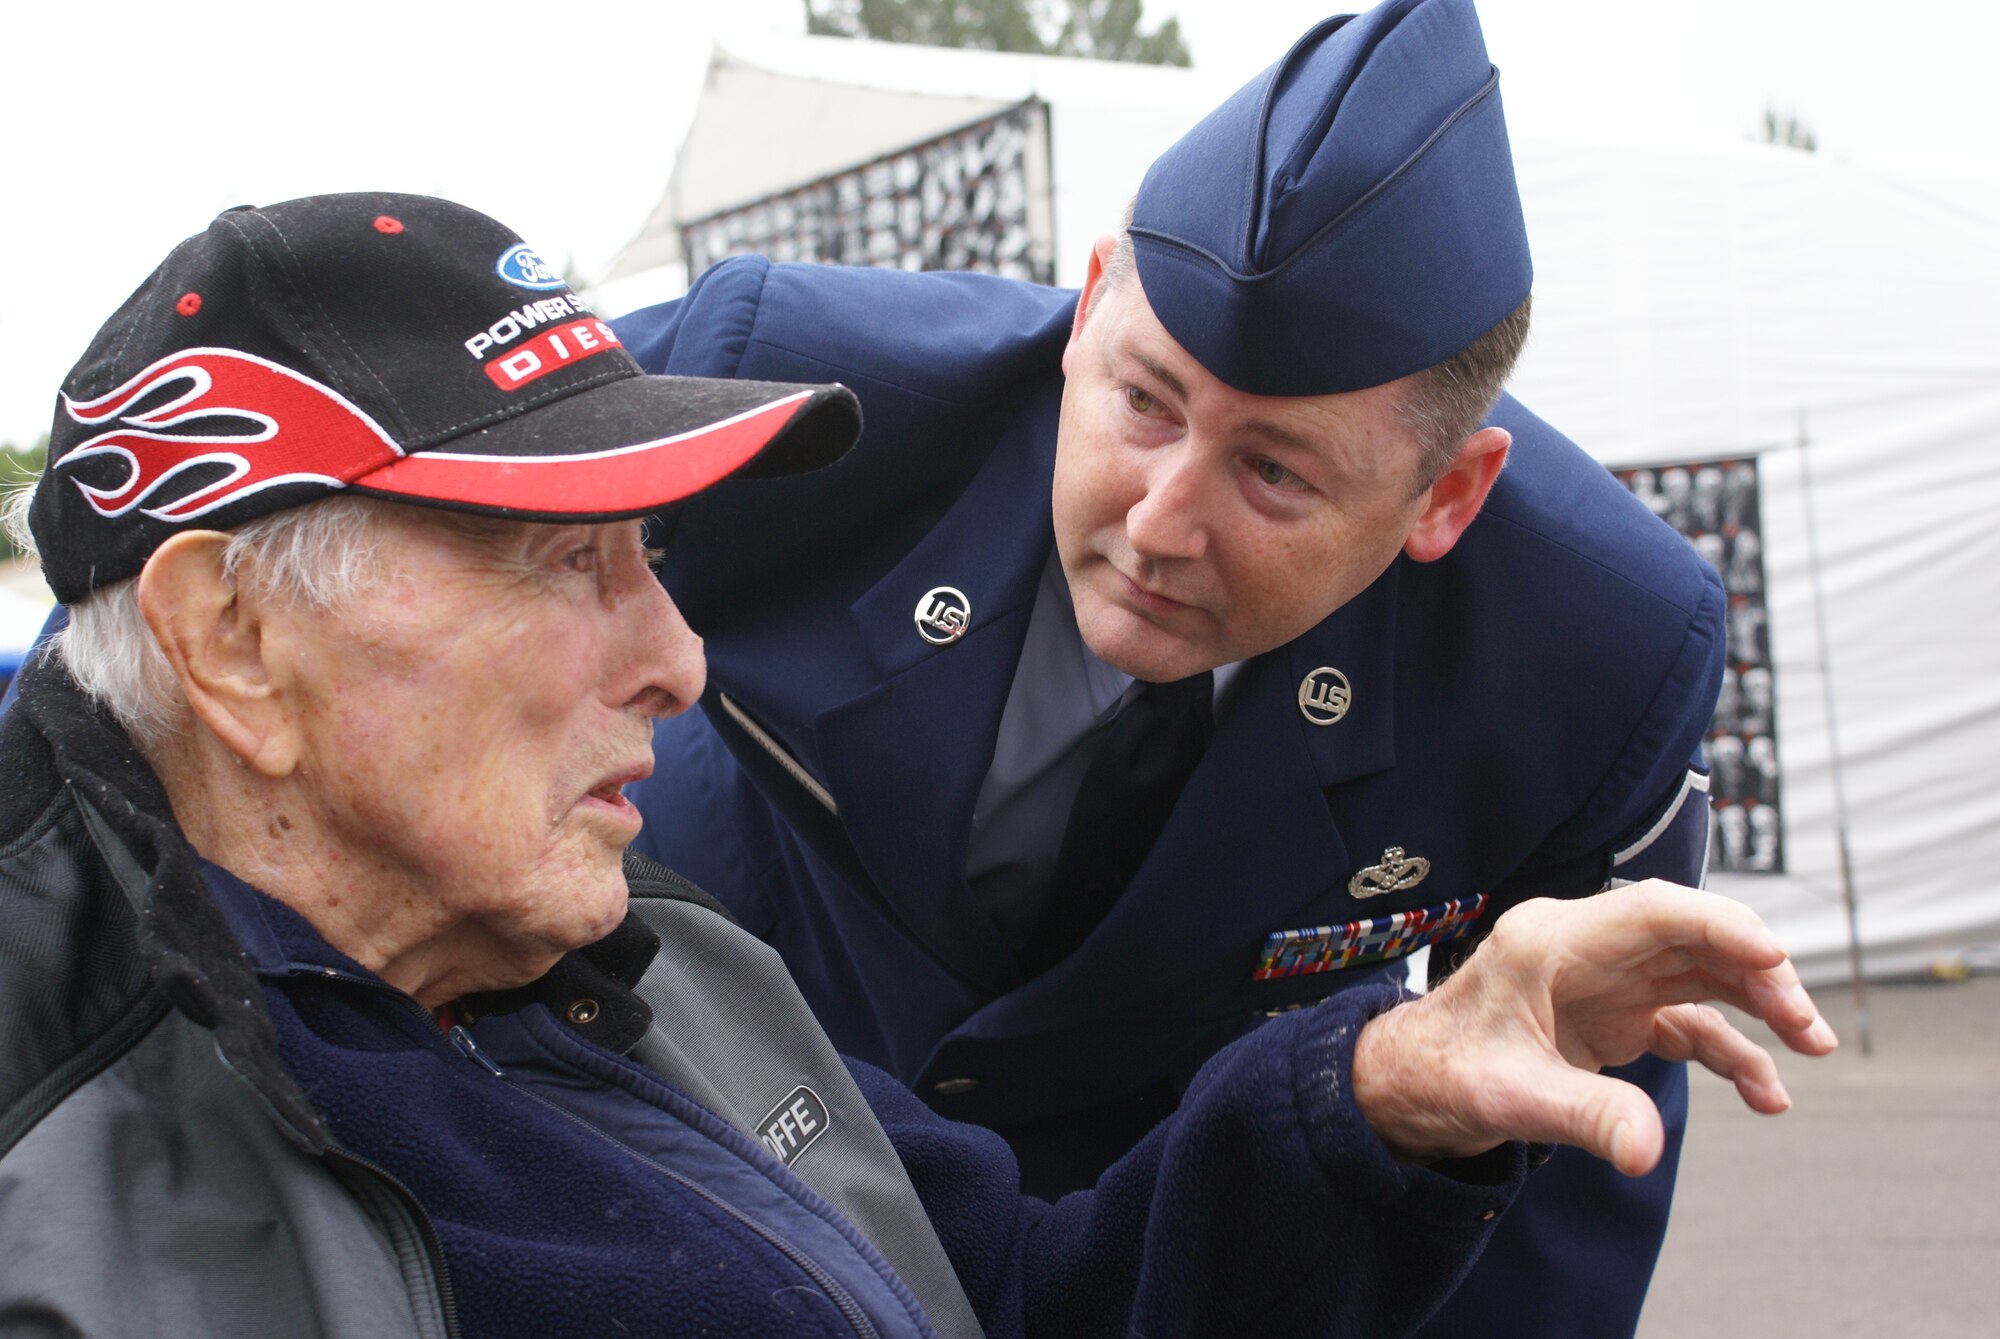 PUYALLUP, Wash. -- Master Sgt. Eric Wentworth, 446th Civil Engineer Squadron, talks with Mr. Elbert “Al” Senyohl, from the Washington Soldiers Home, while at the Puyallup Fair. (U.S. Air Force photo/Bud McKay)